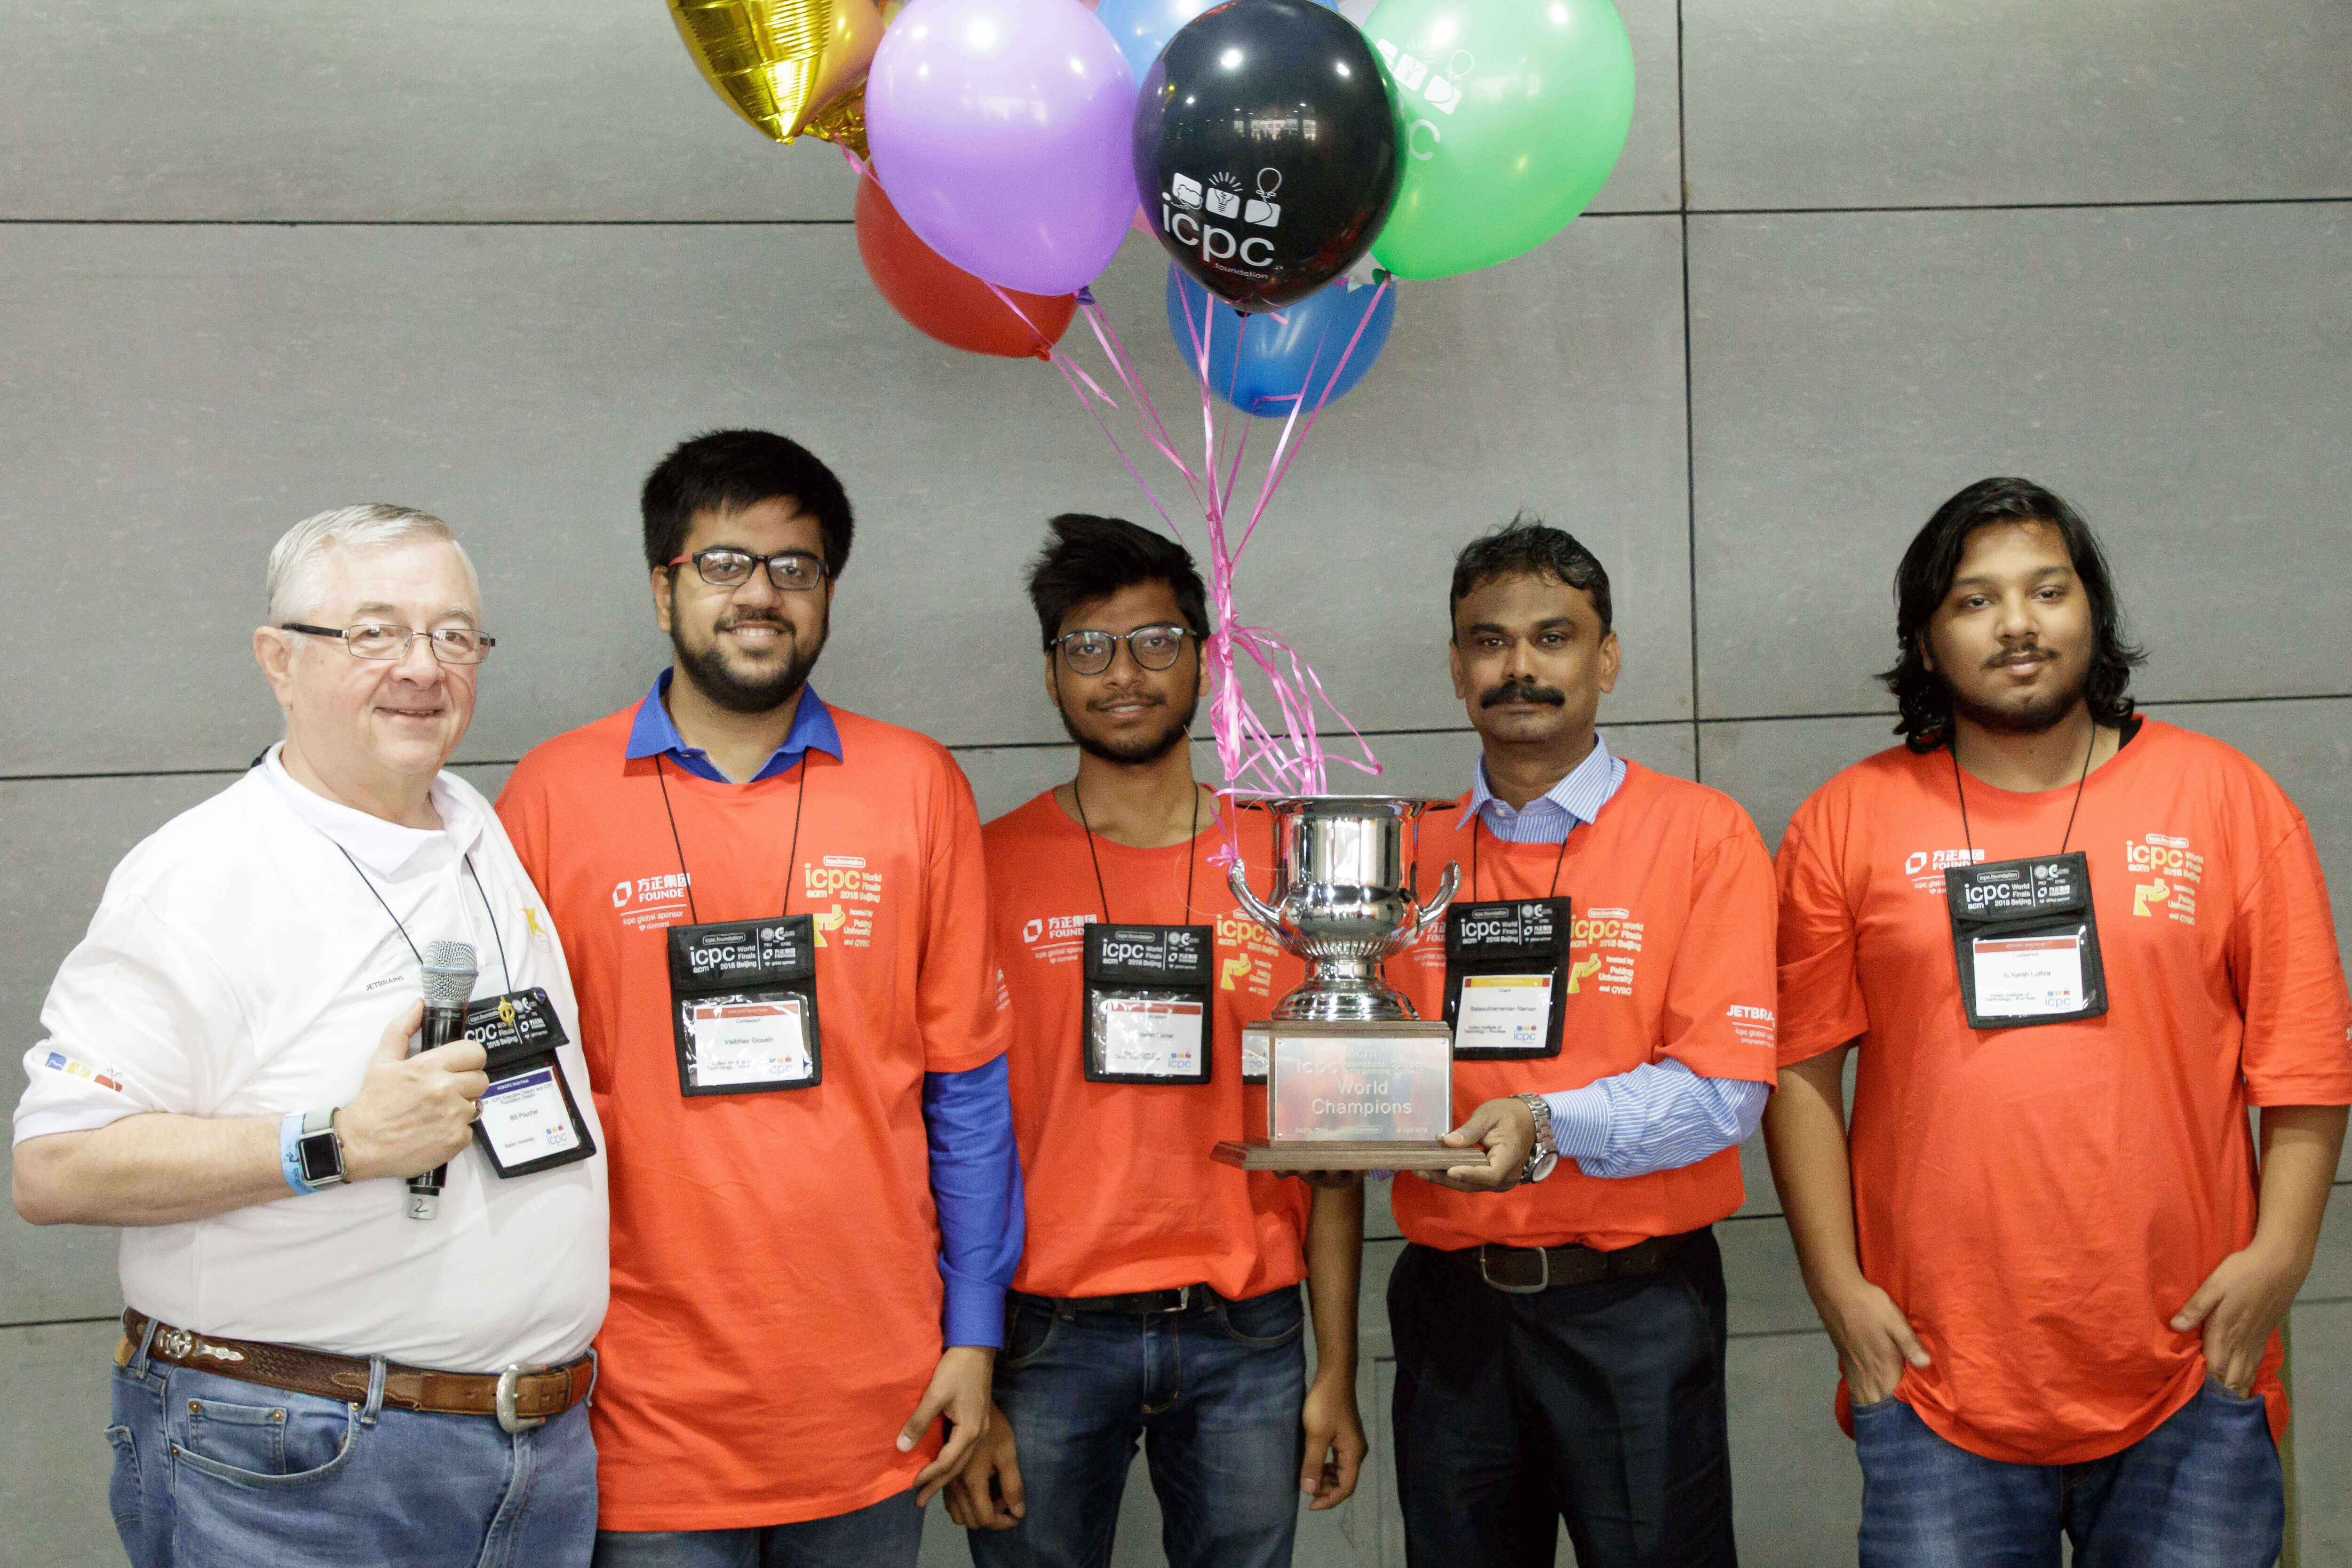 IIT Roorkee team comes 2nd among Indian teams at the ‘Olympics of Multi-Tier Programming Competition’ held in Beijing